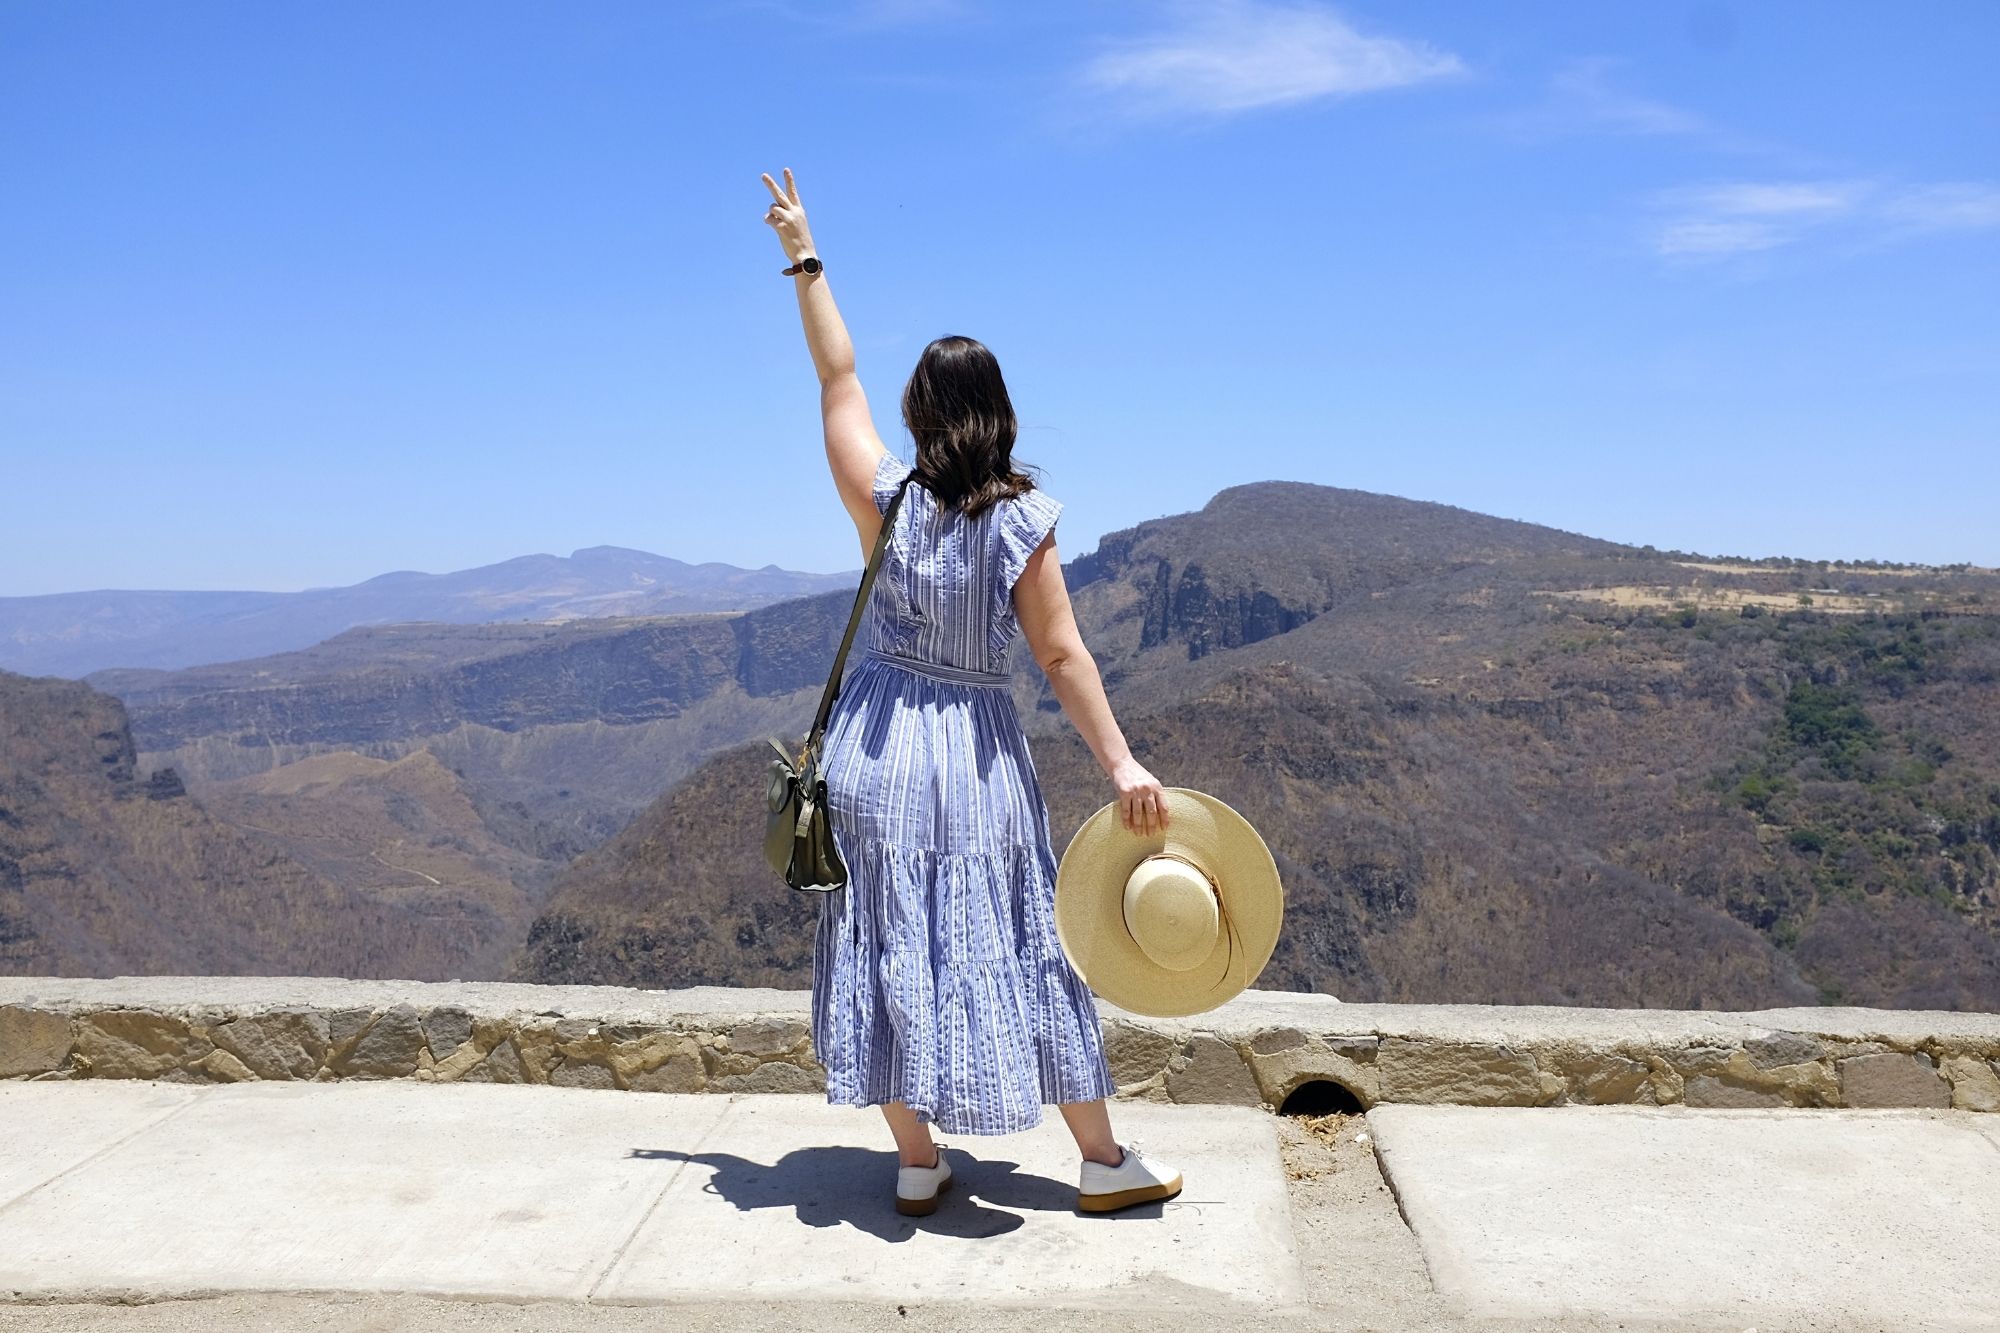 Alyssa holds a peace sign in the air and faces the canyon in Guadalajara